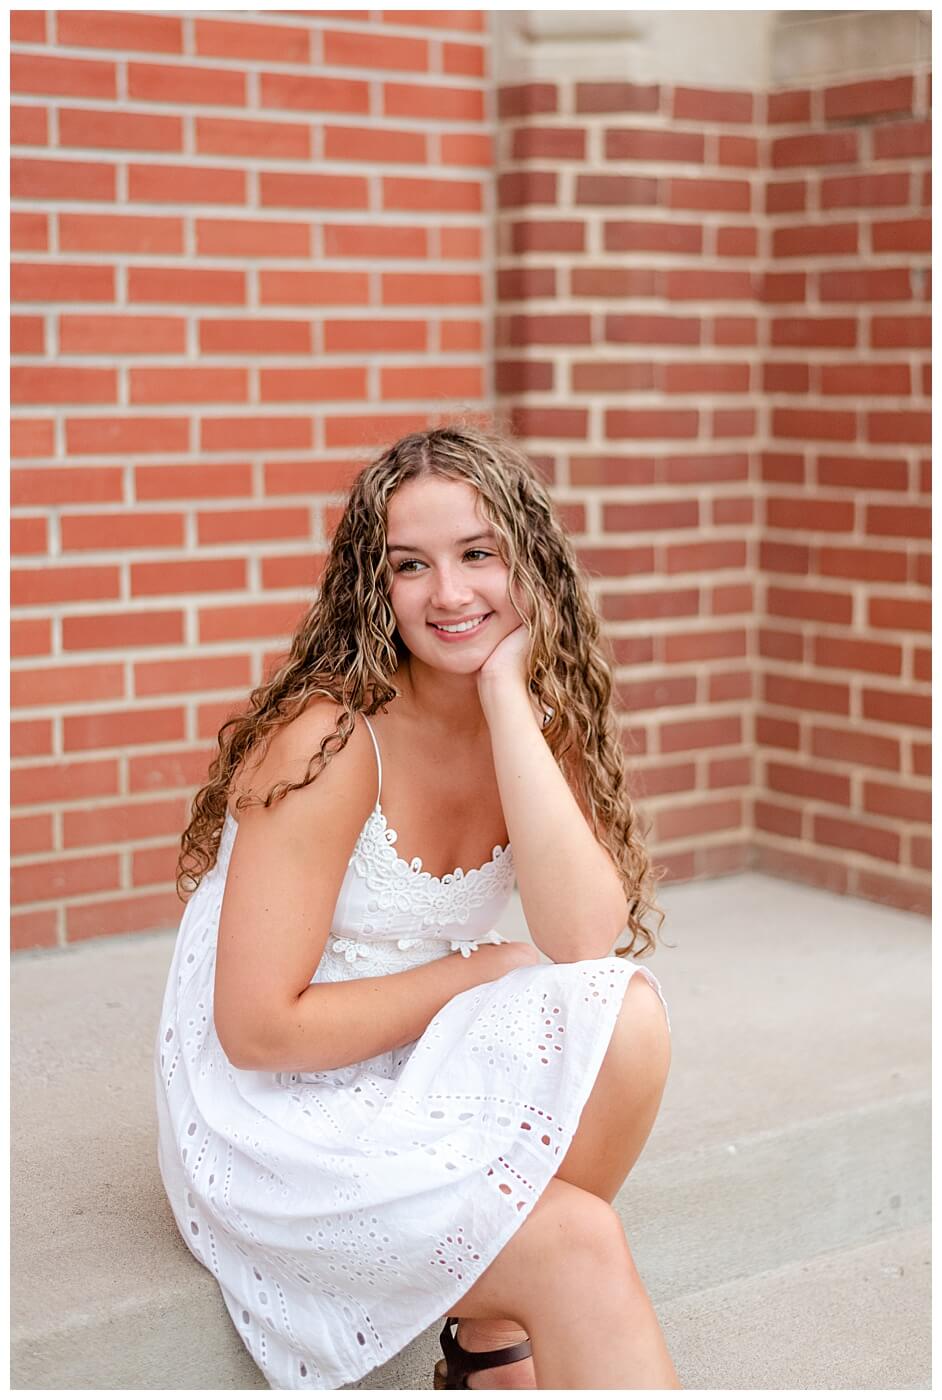 Cailey Baseden - Graduation 2021 - 11 - Grad sitting on steps in white dress